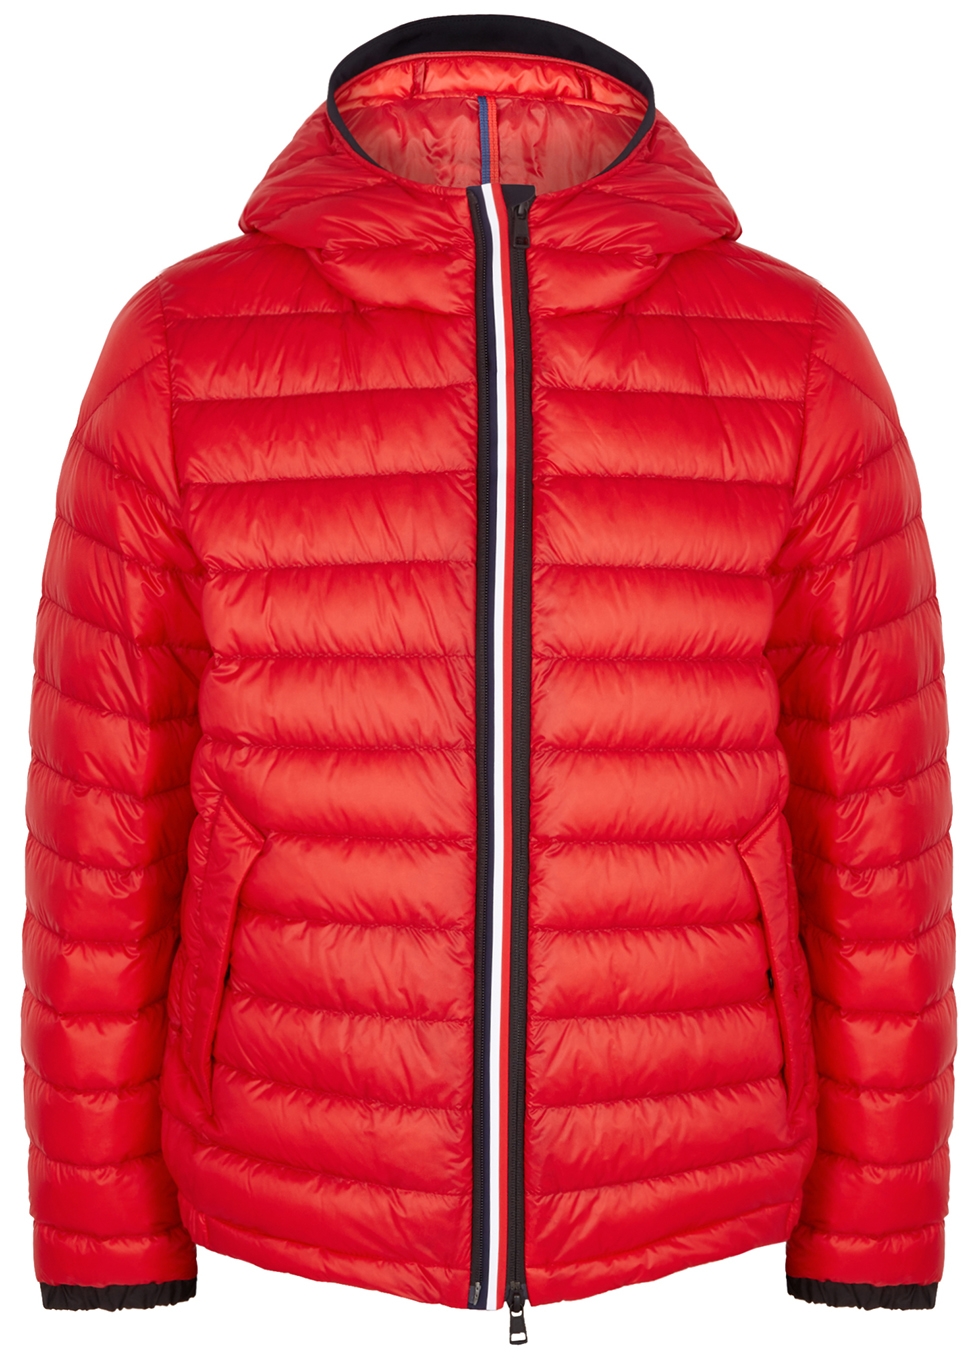 Moncler Morvan red quilted shell jacket - Harvey Nichols